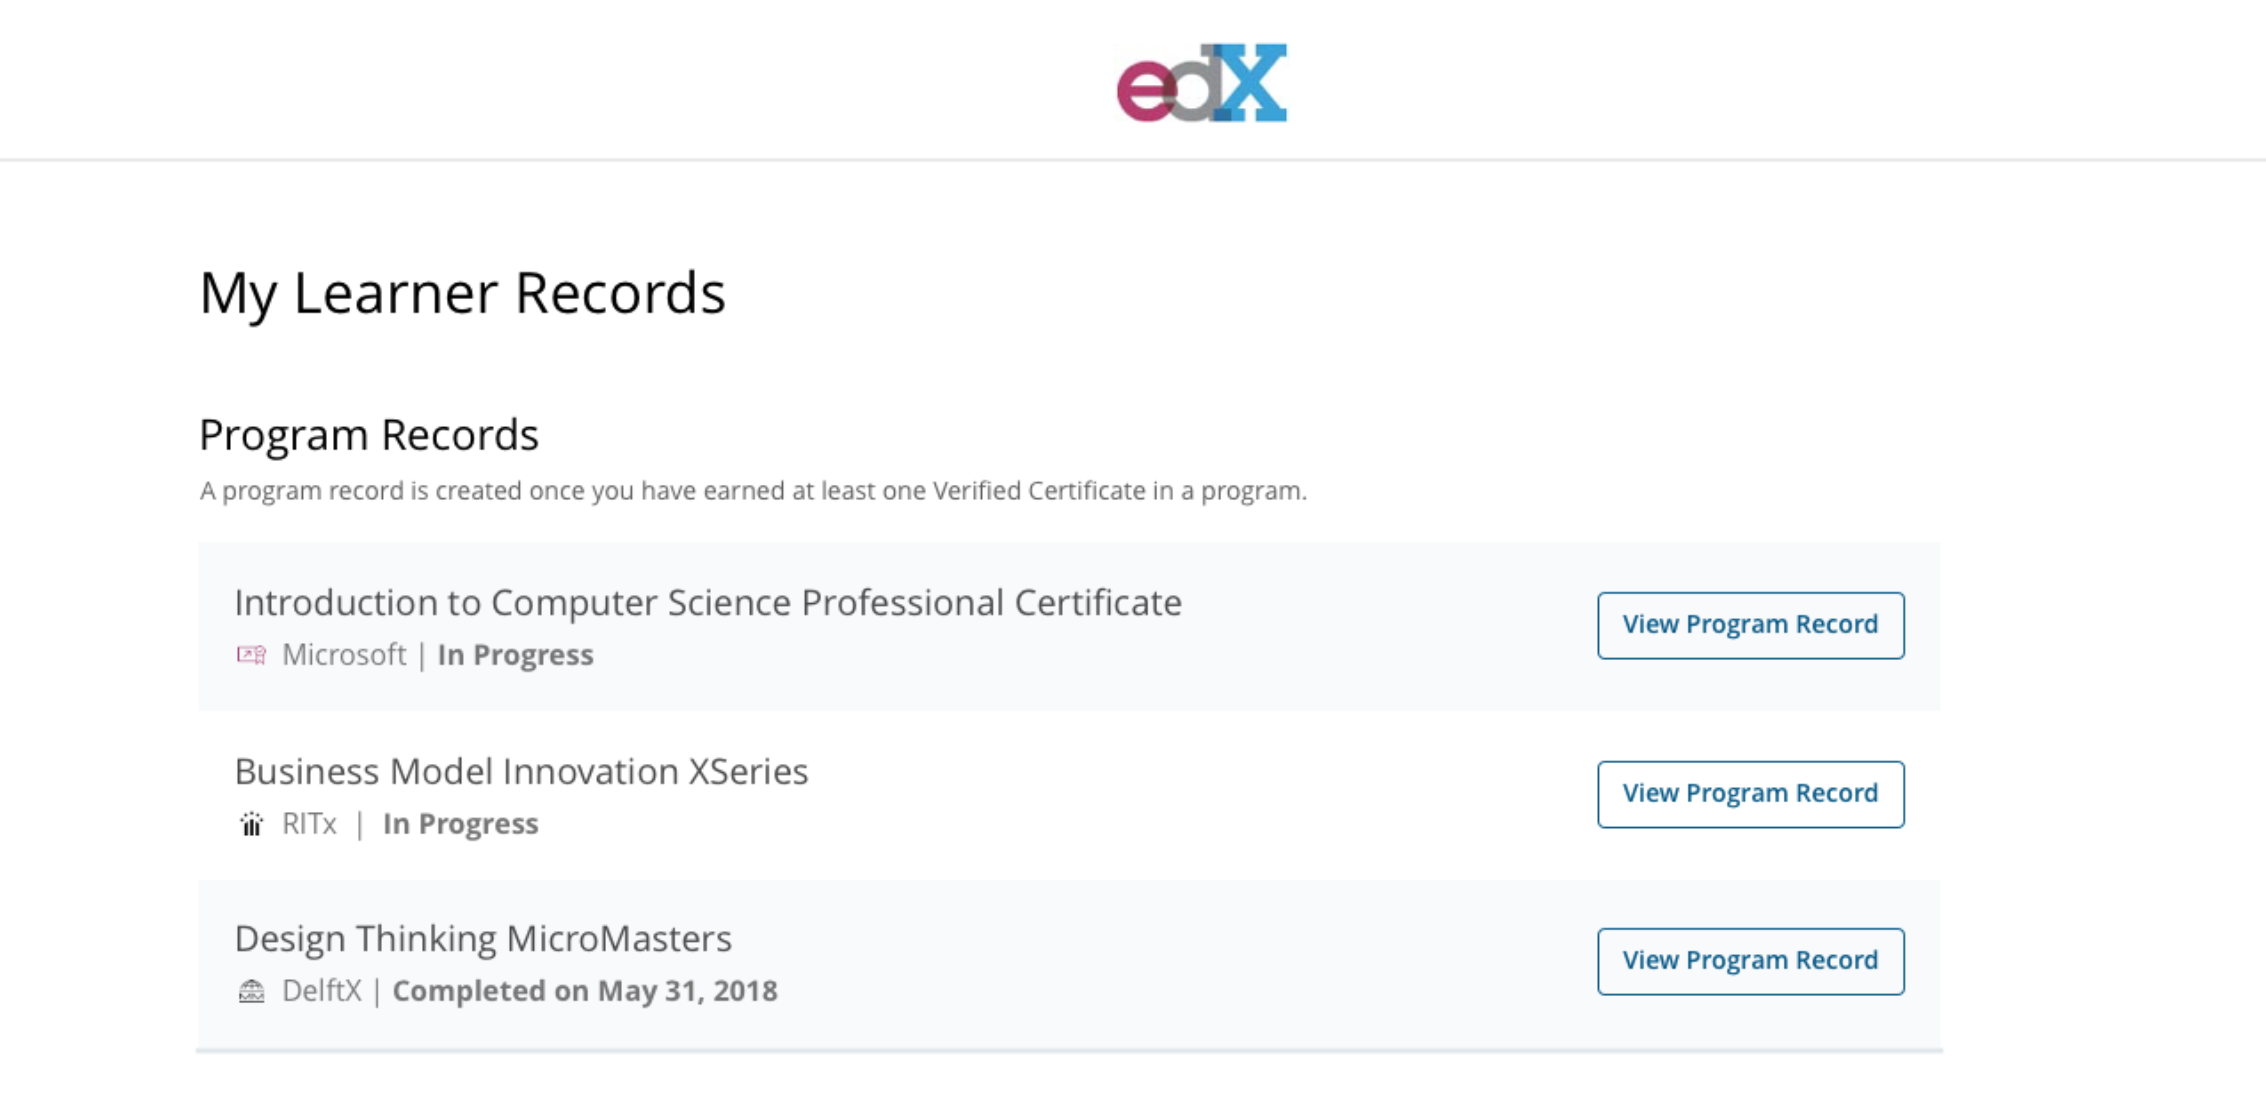 edX learner records